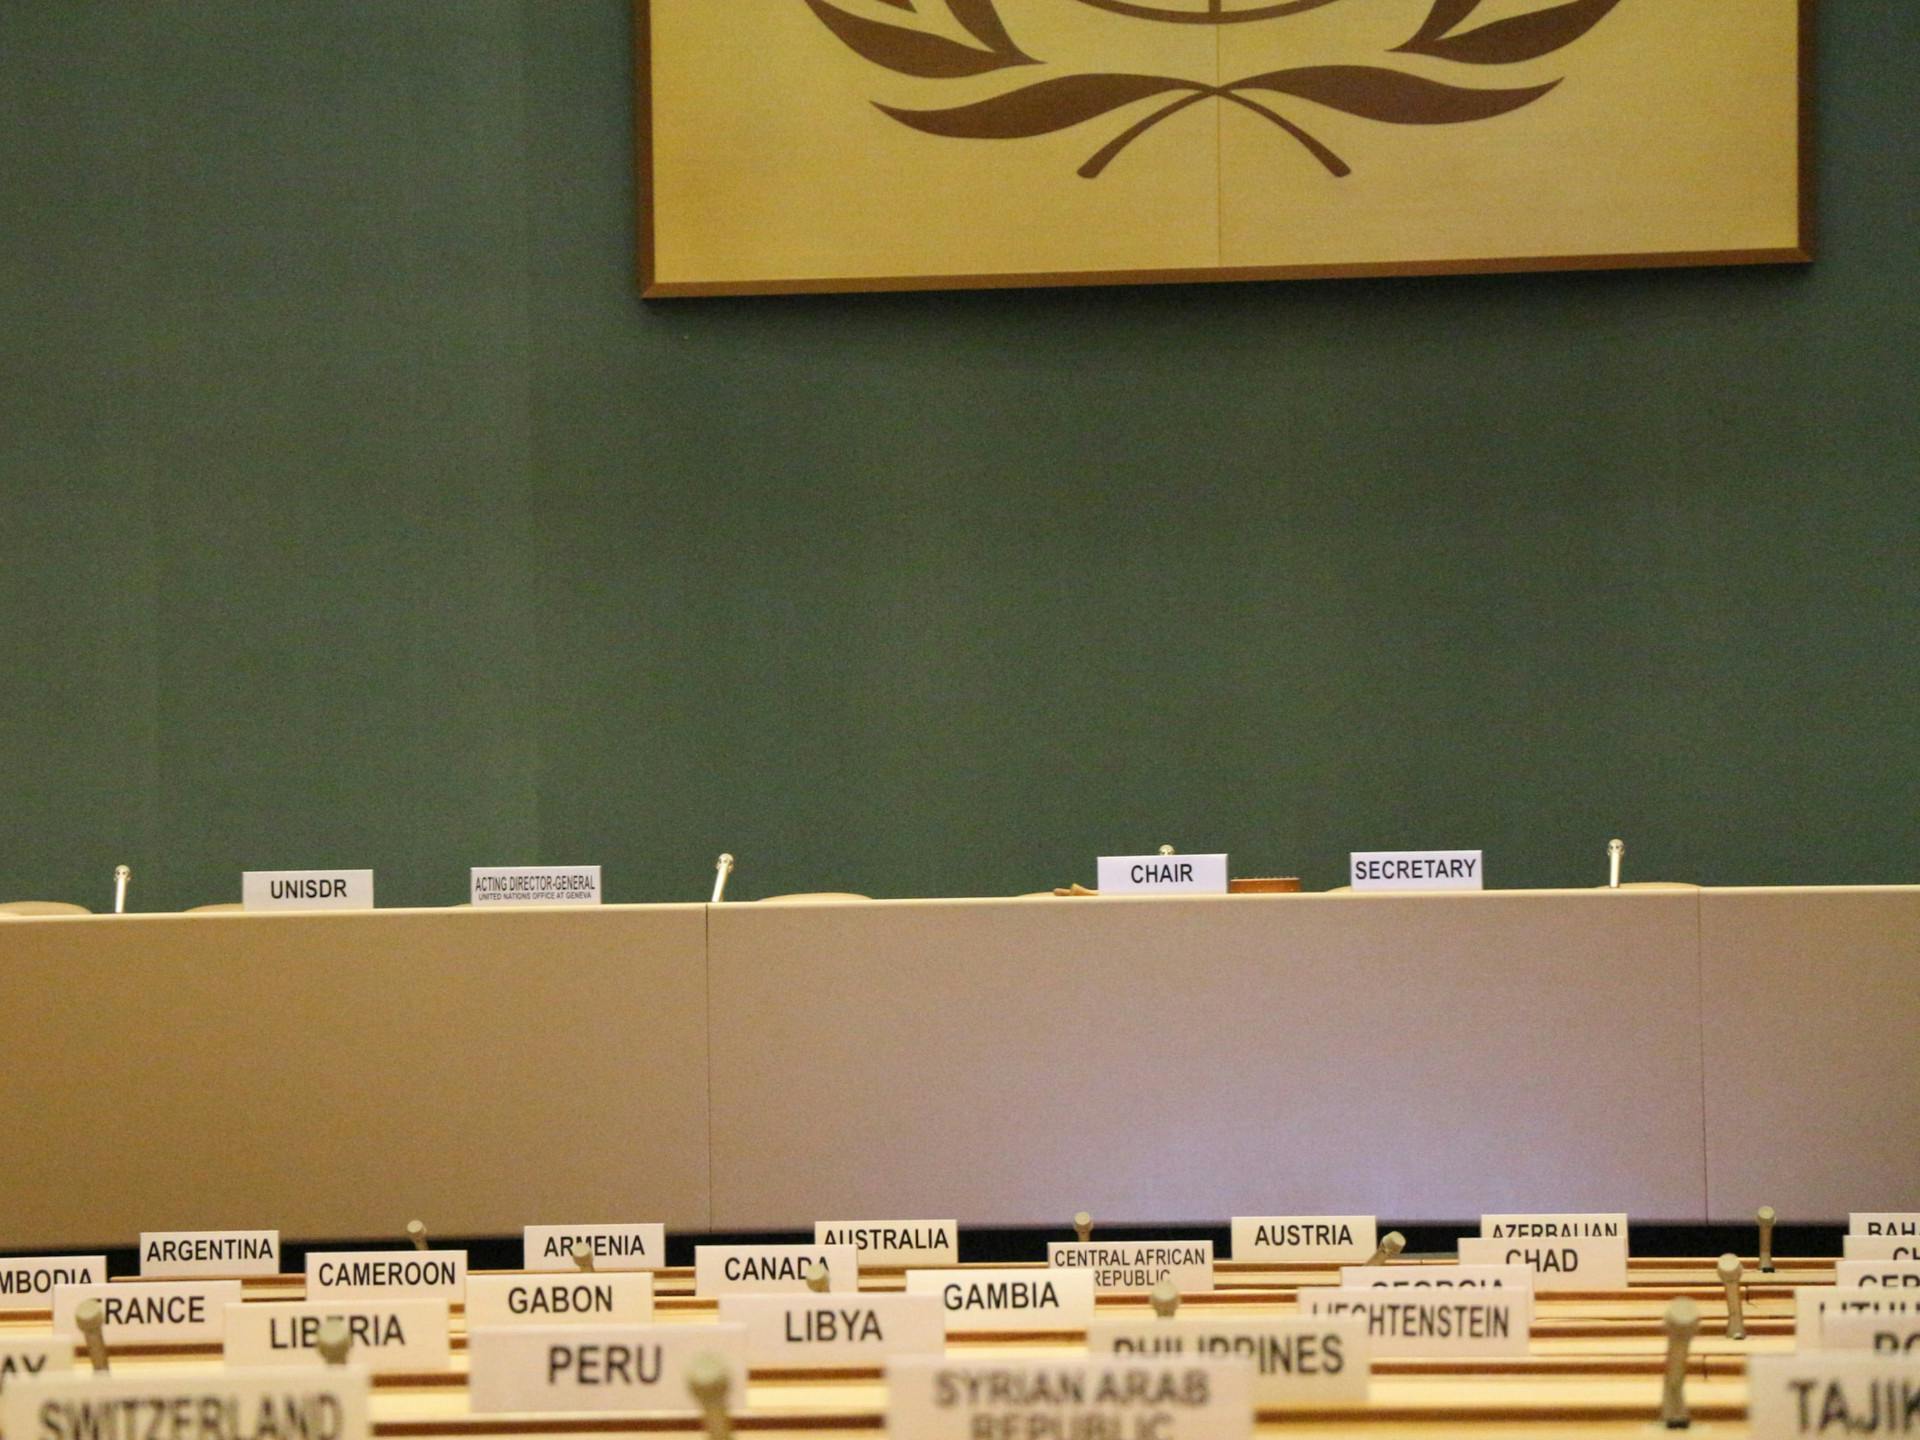 A meeting room of the United Nations with signs of country names.